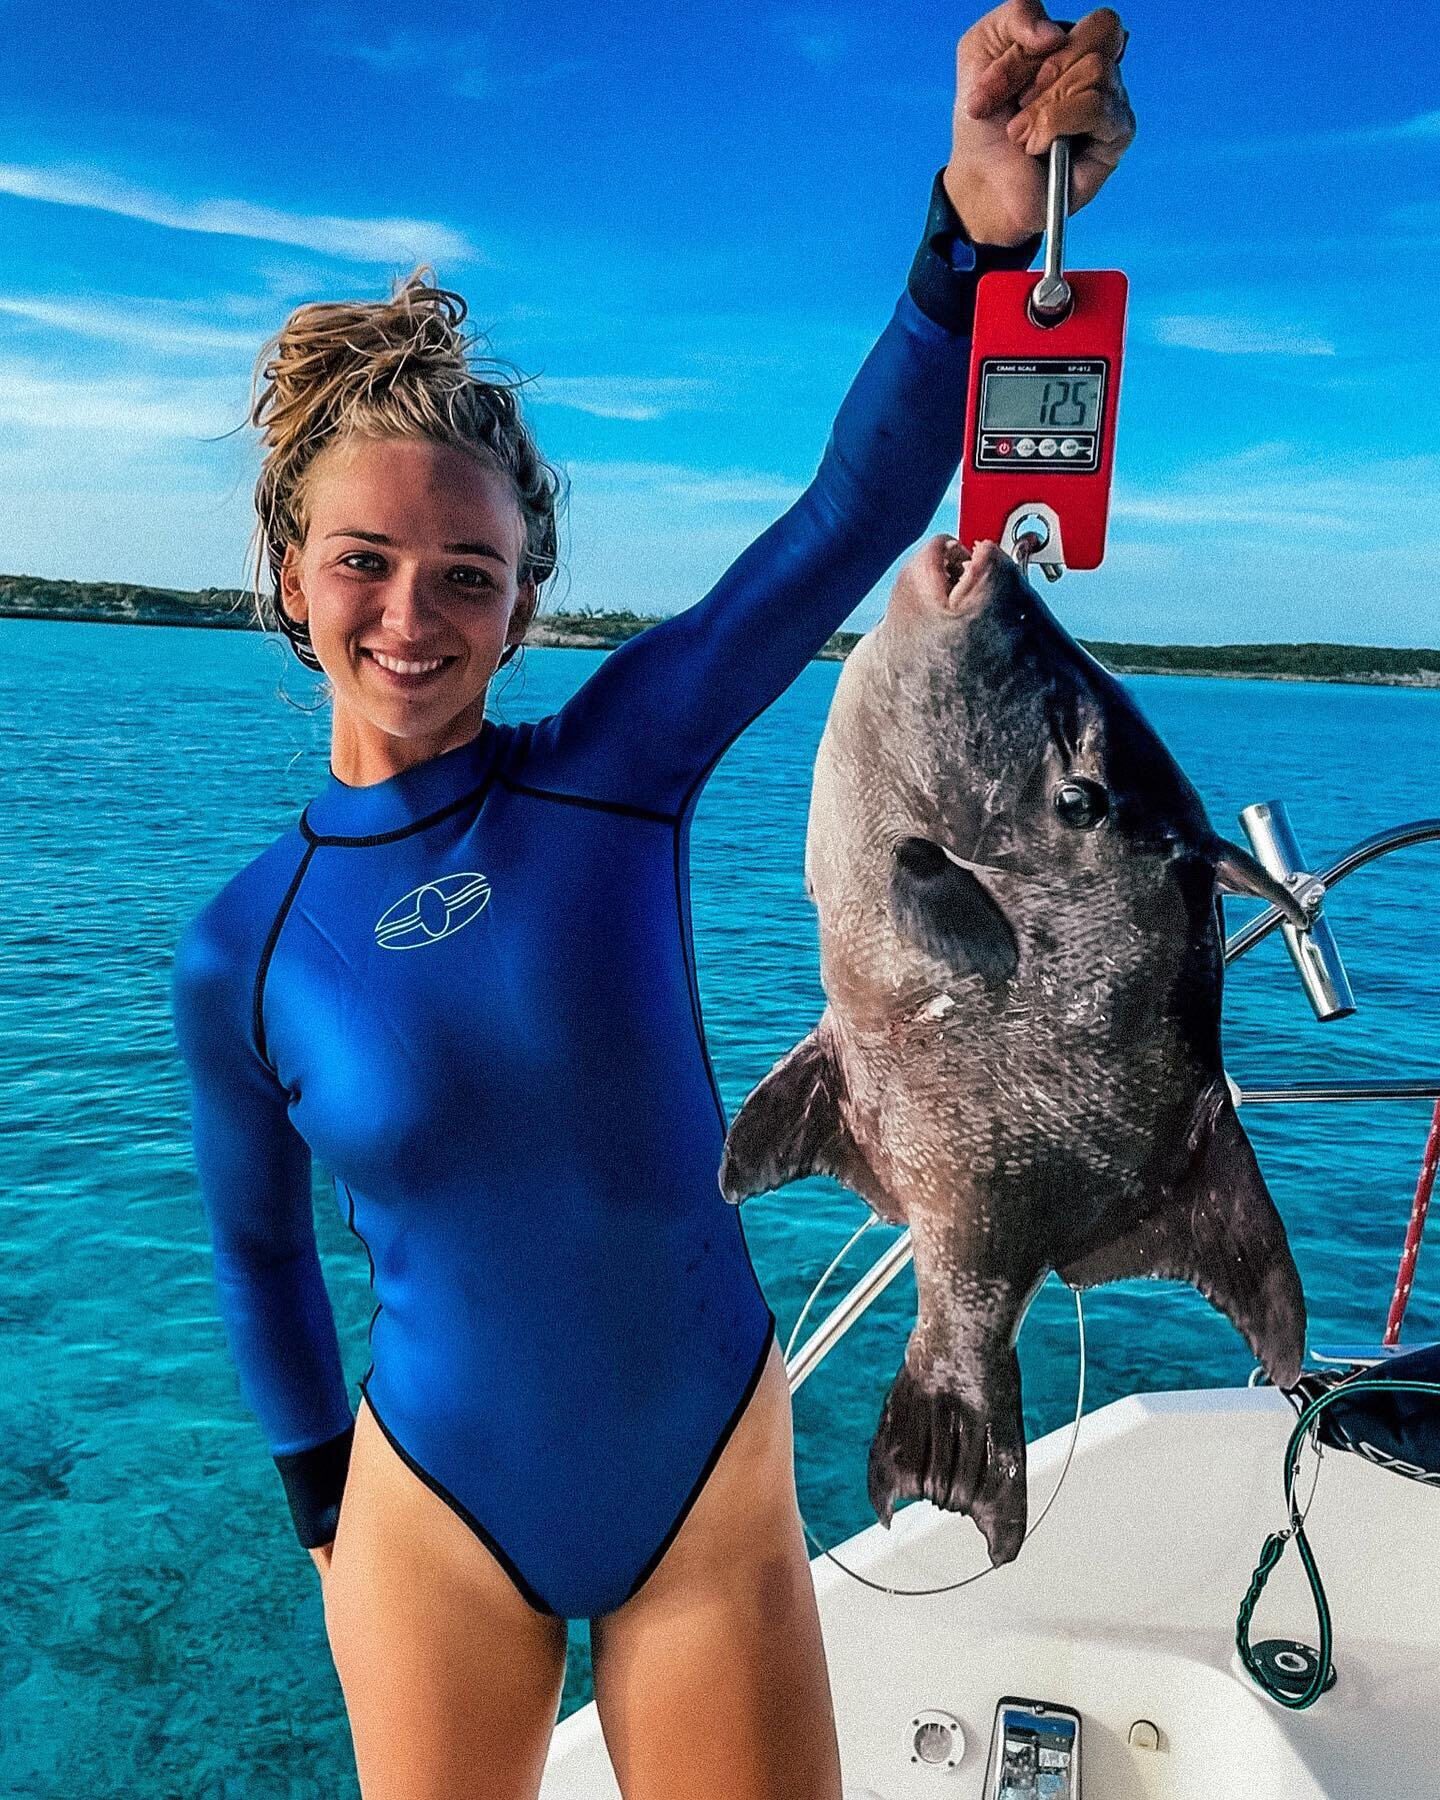 Sascha shot her first Trigger Fish with her @evolvediving pole spear and it was 0.2 lbs off the pending world record shot by a female on a pole spear!! @freediversteph that 12.7 lb trigger you shot was definitely a monster!! A little friendly competi